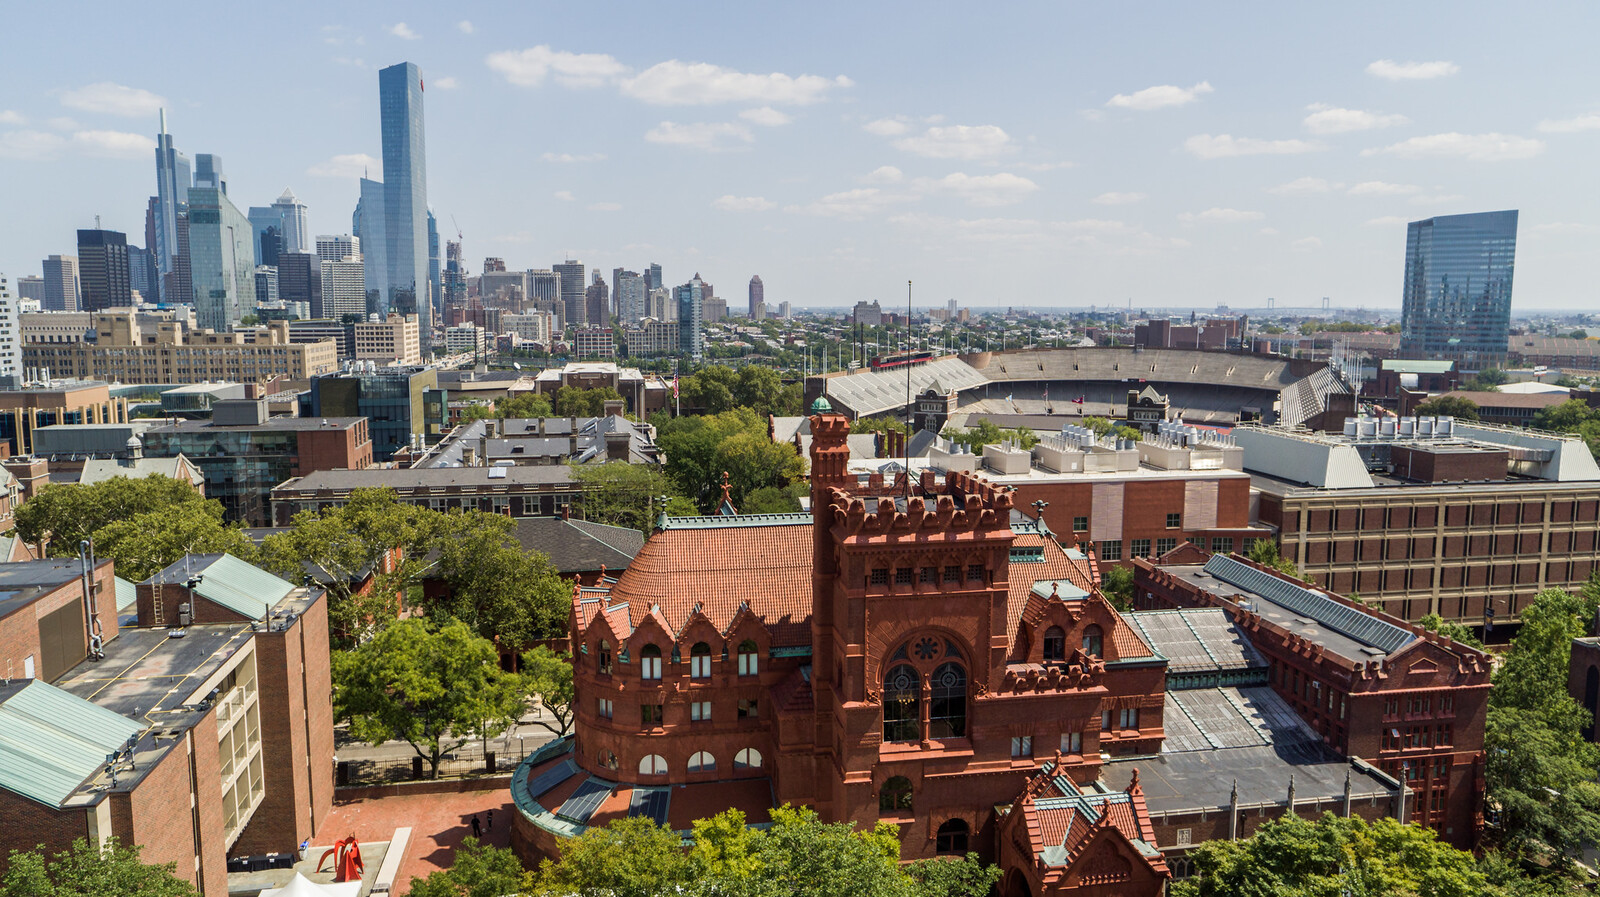 Penn campus in foreground of city scape of Philadelphia